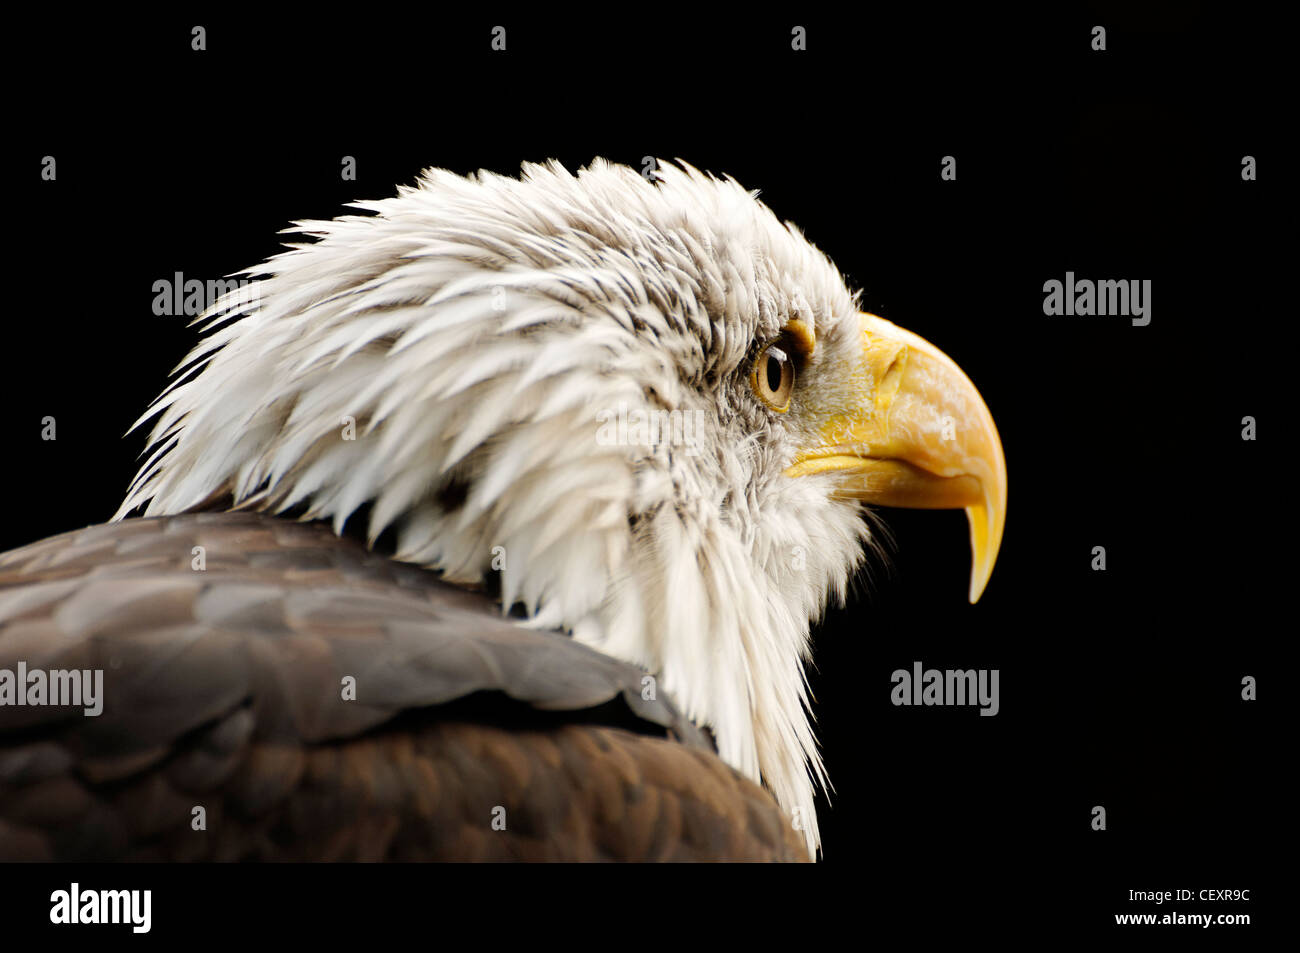 A portrait of an American Bald Eagle Stock Photo